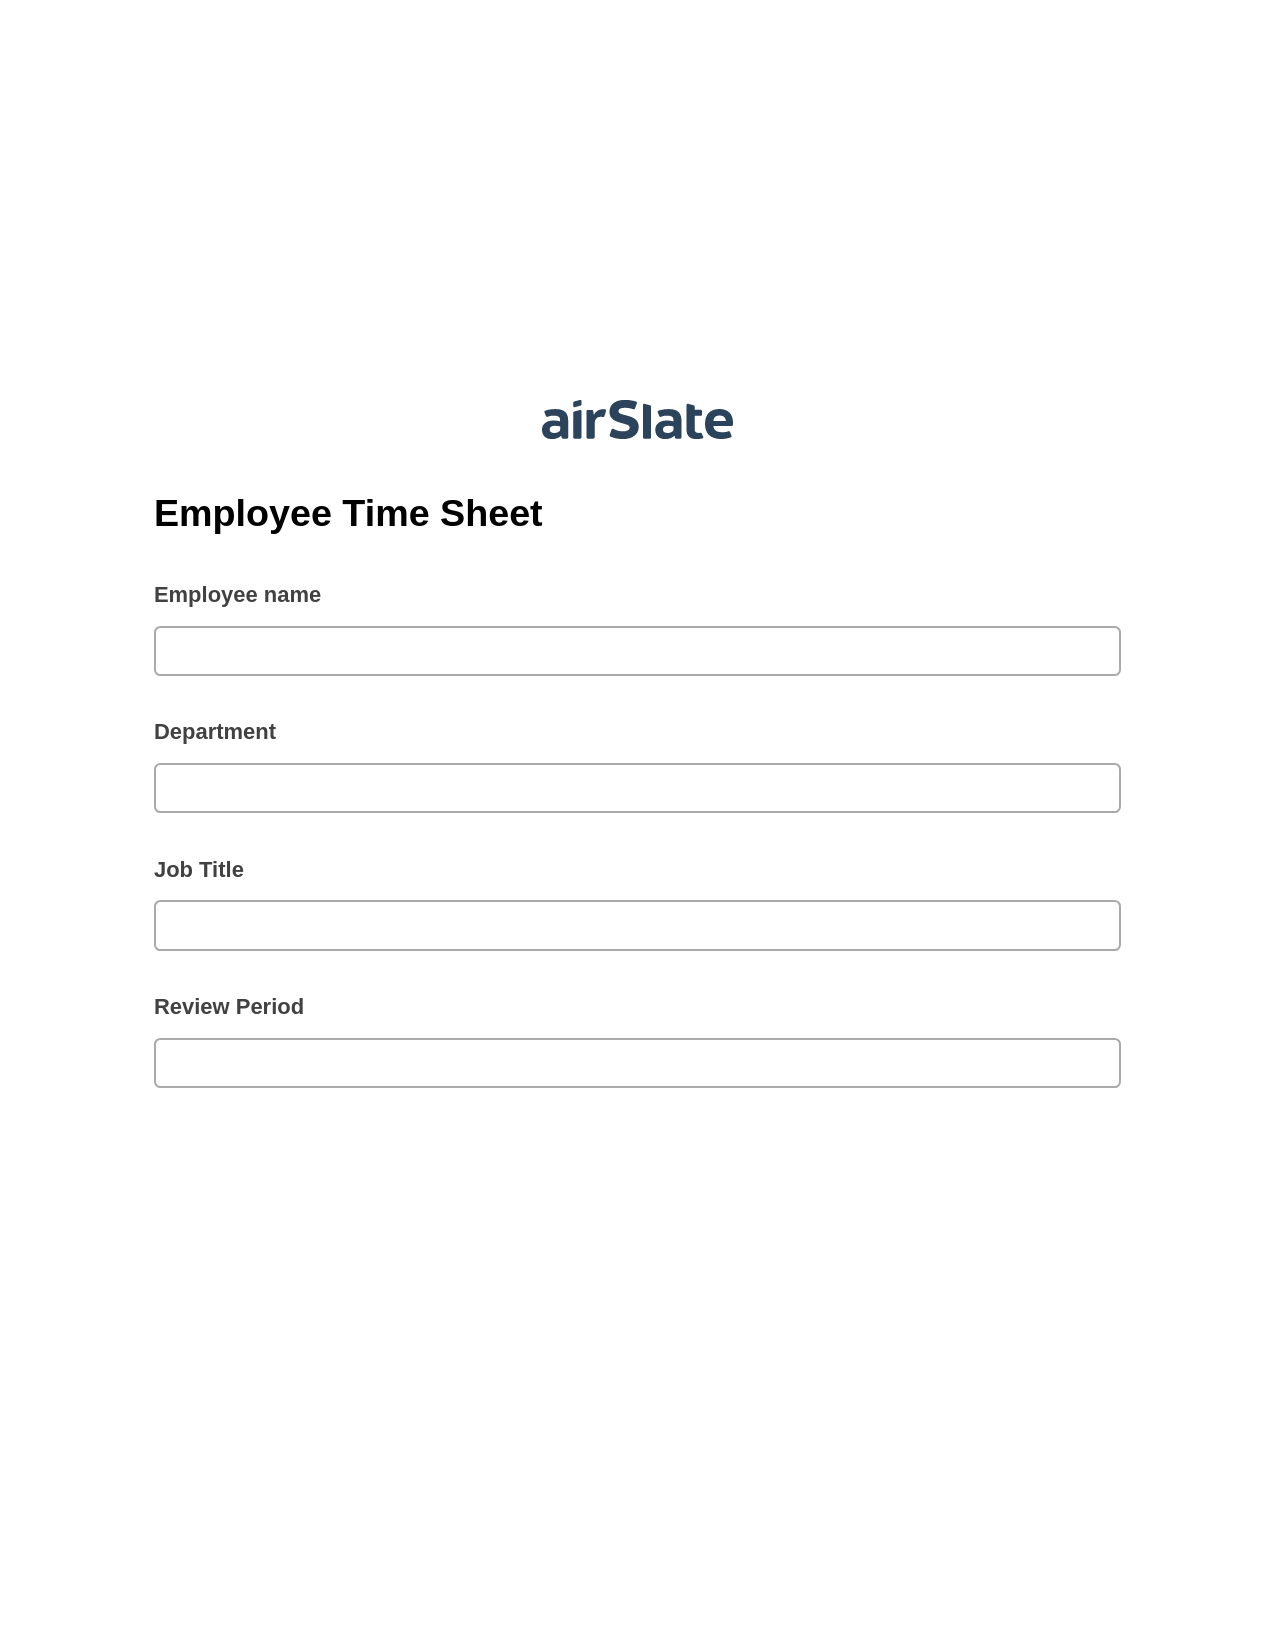 Multirole Employee Time Sheet Pre-fill from Salesforce Records Bot, Create Salesforce Records Bot, Export to Excel 365 Bot